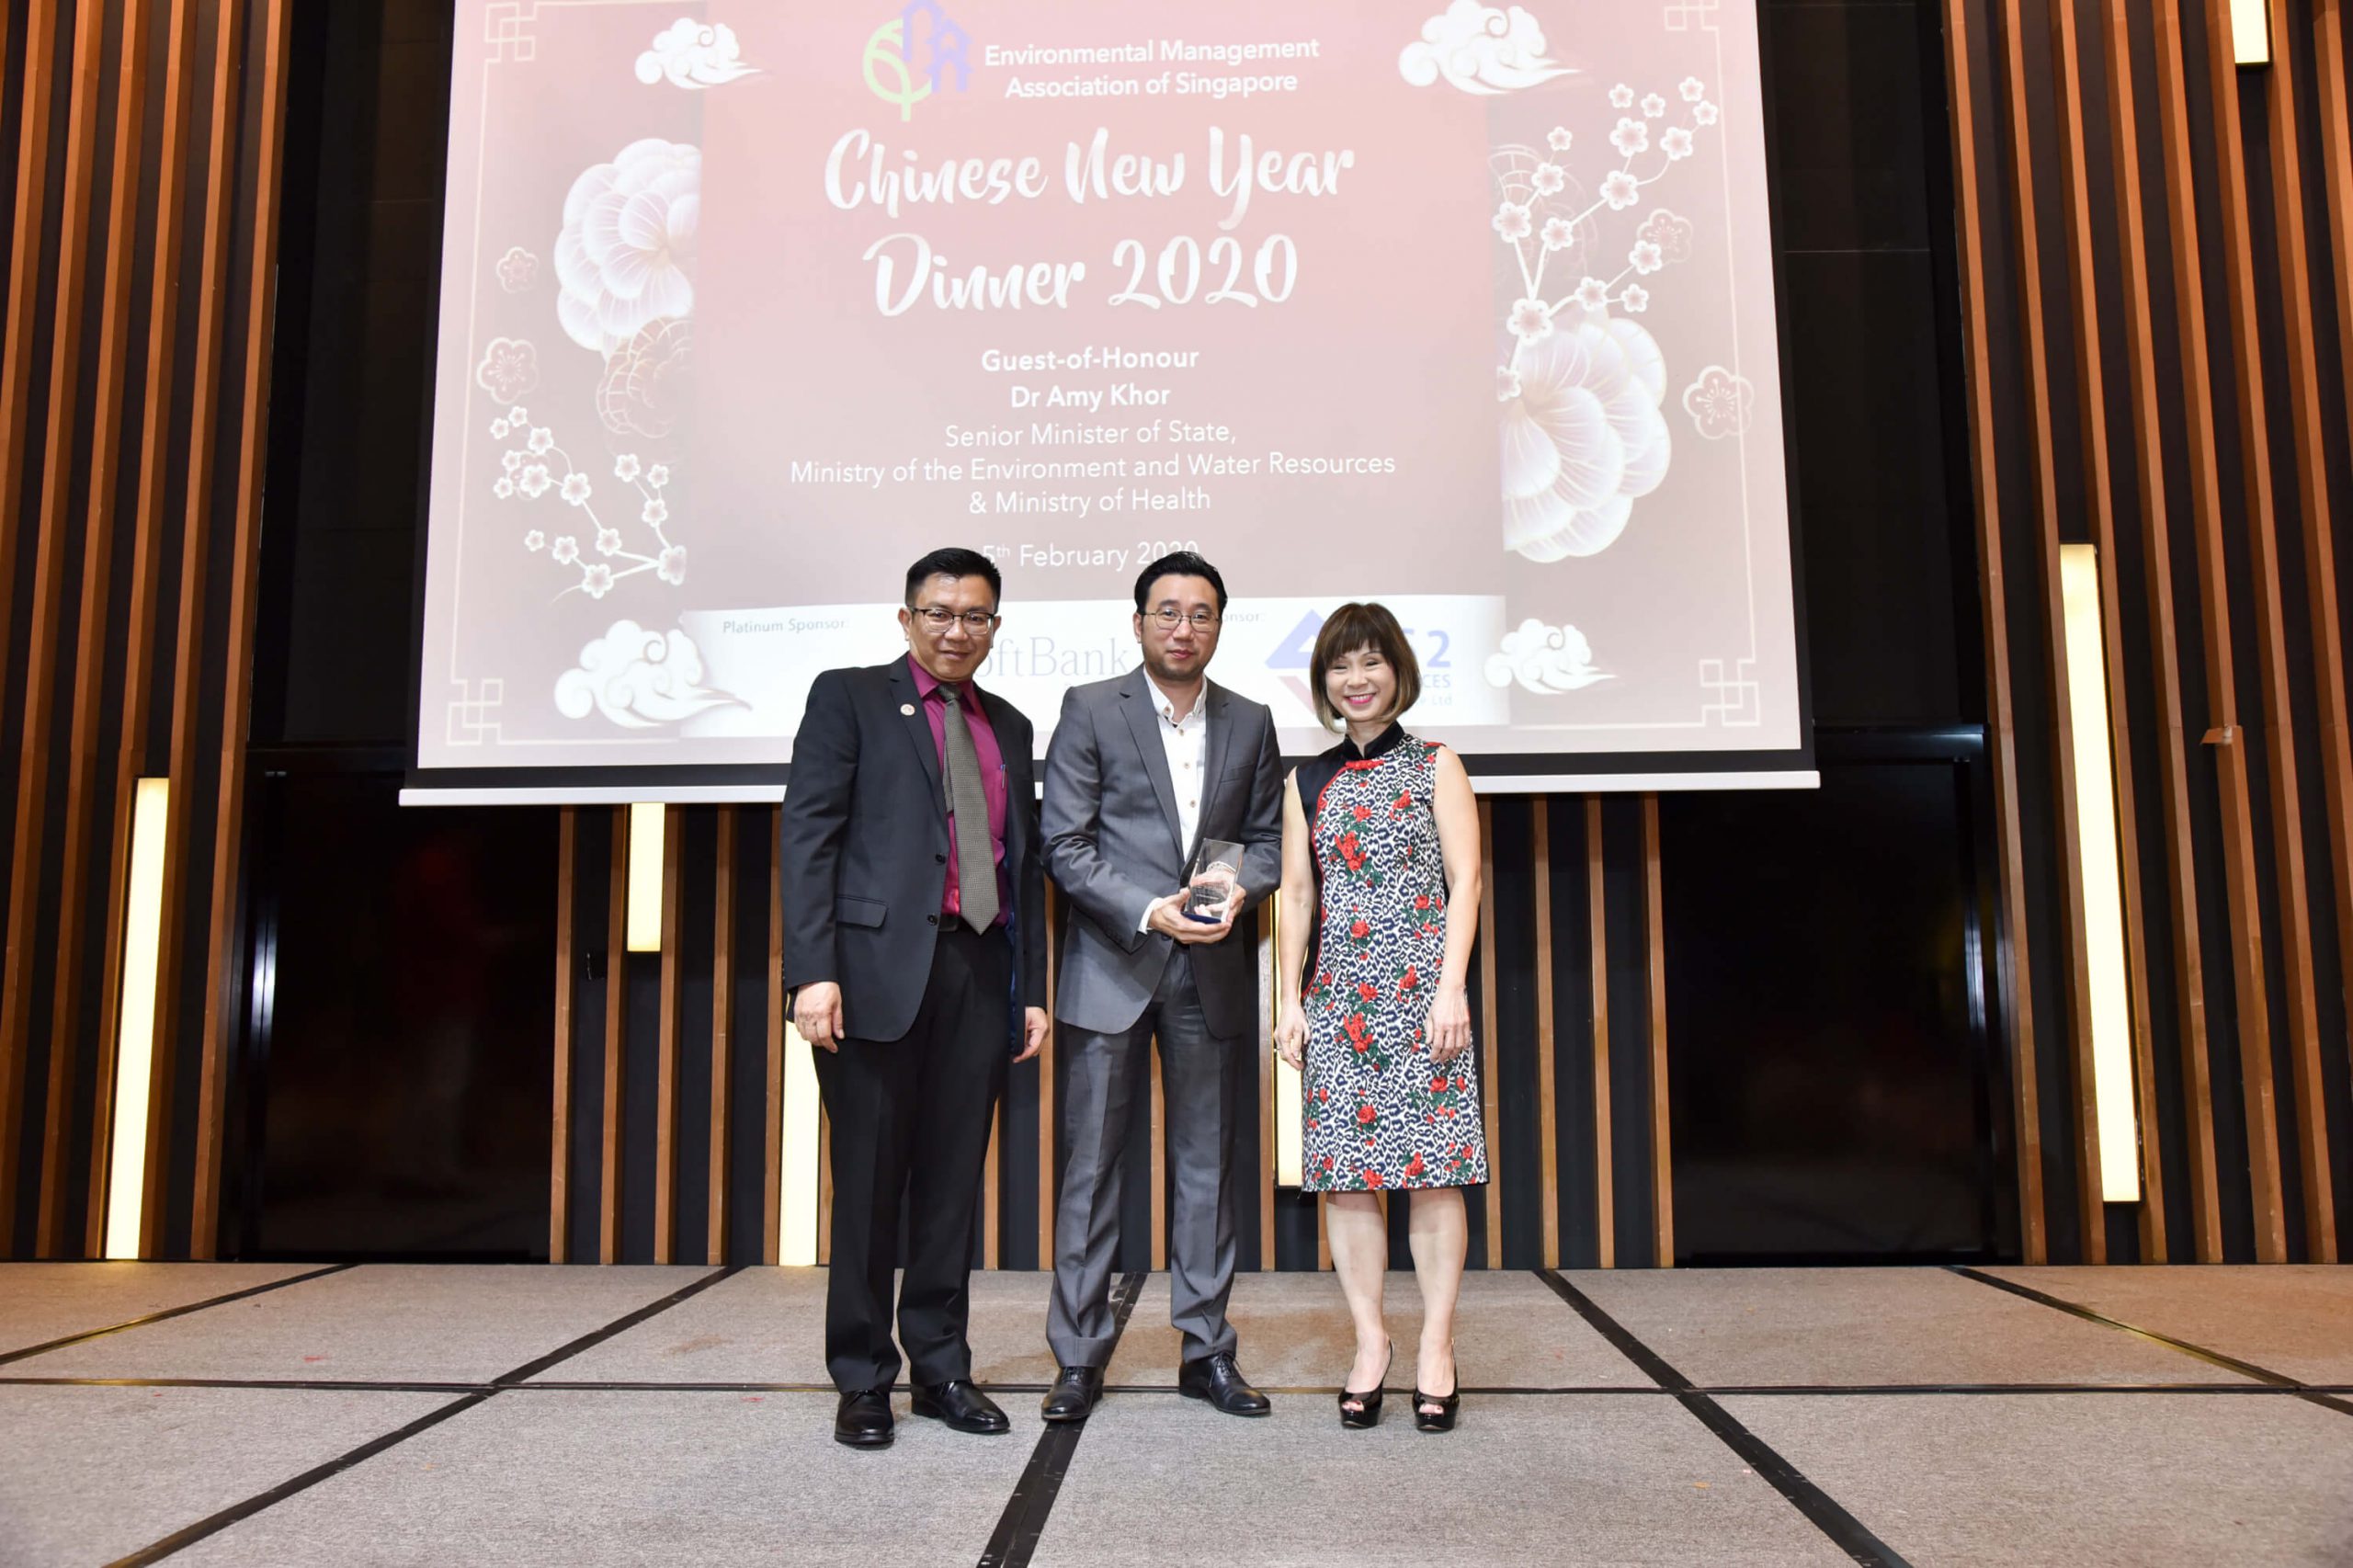 Moët Hennessy Diageo Singapore - Food Production - Overview, Competitors,  and Employees